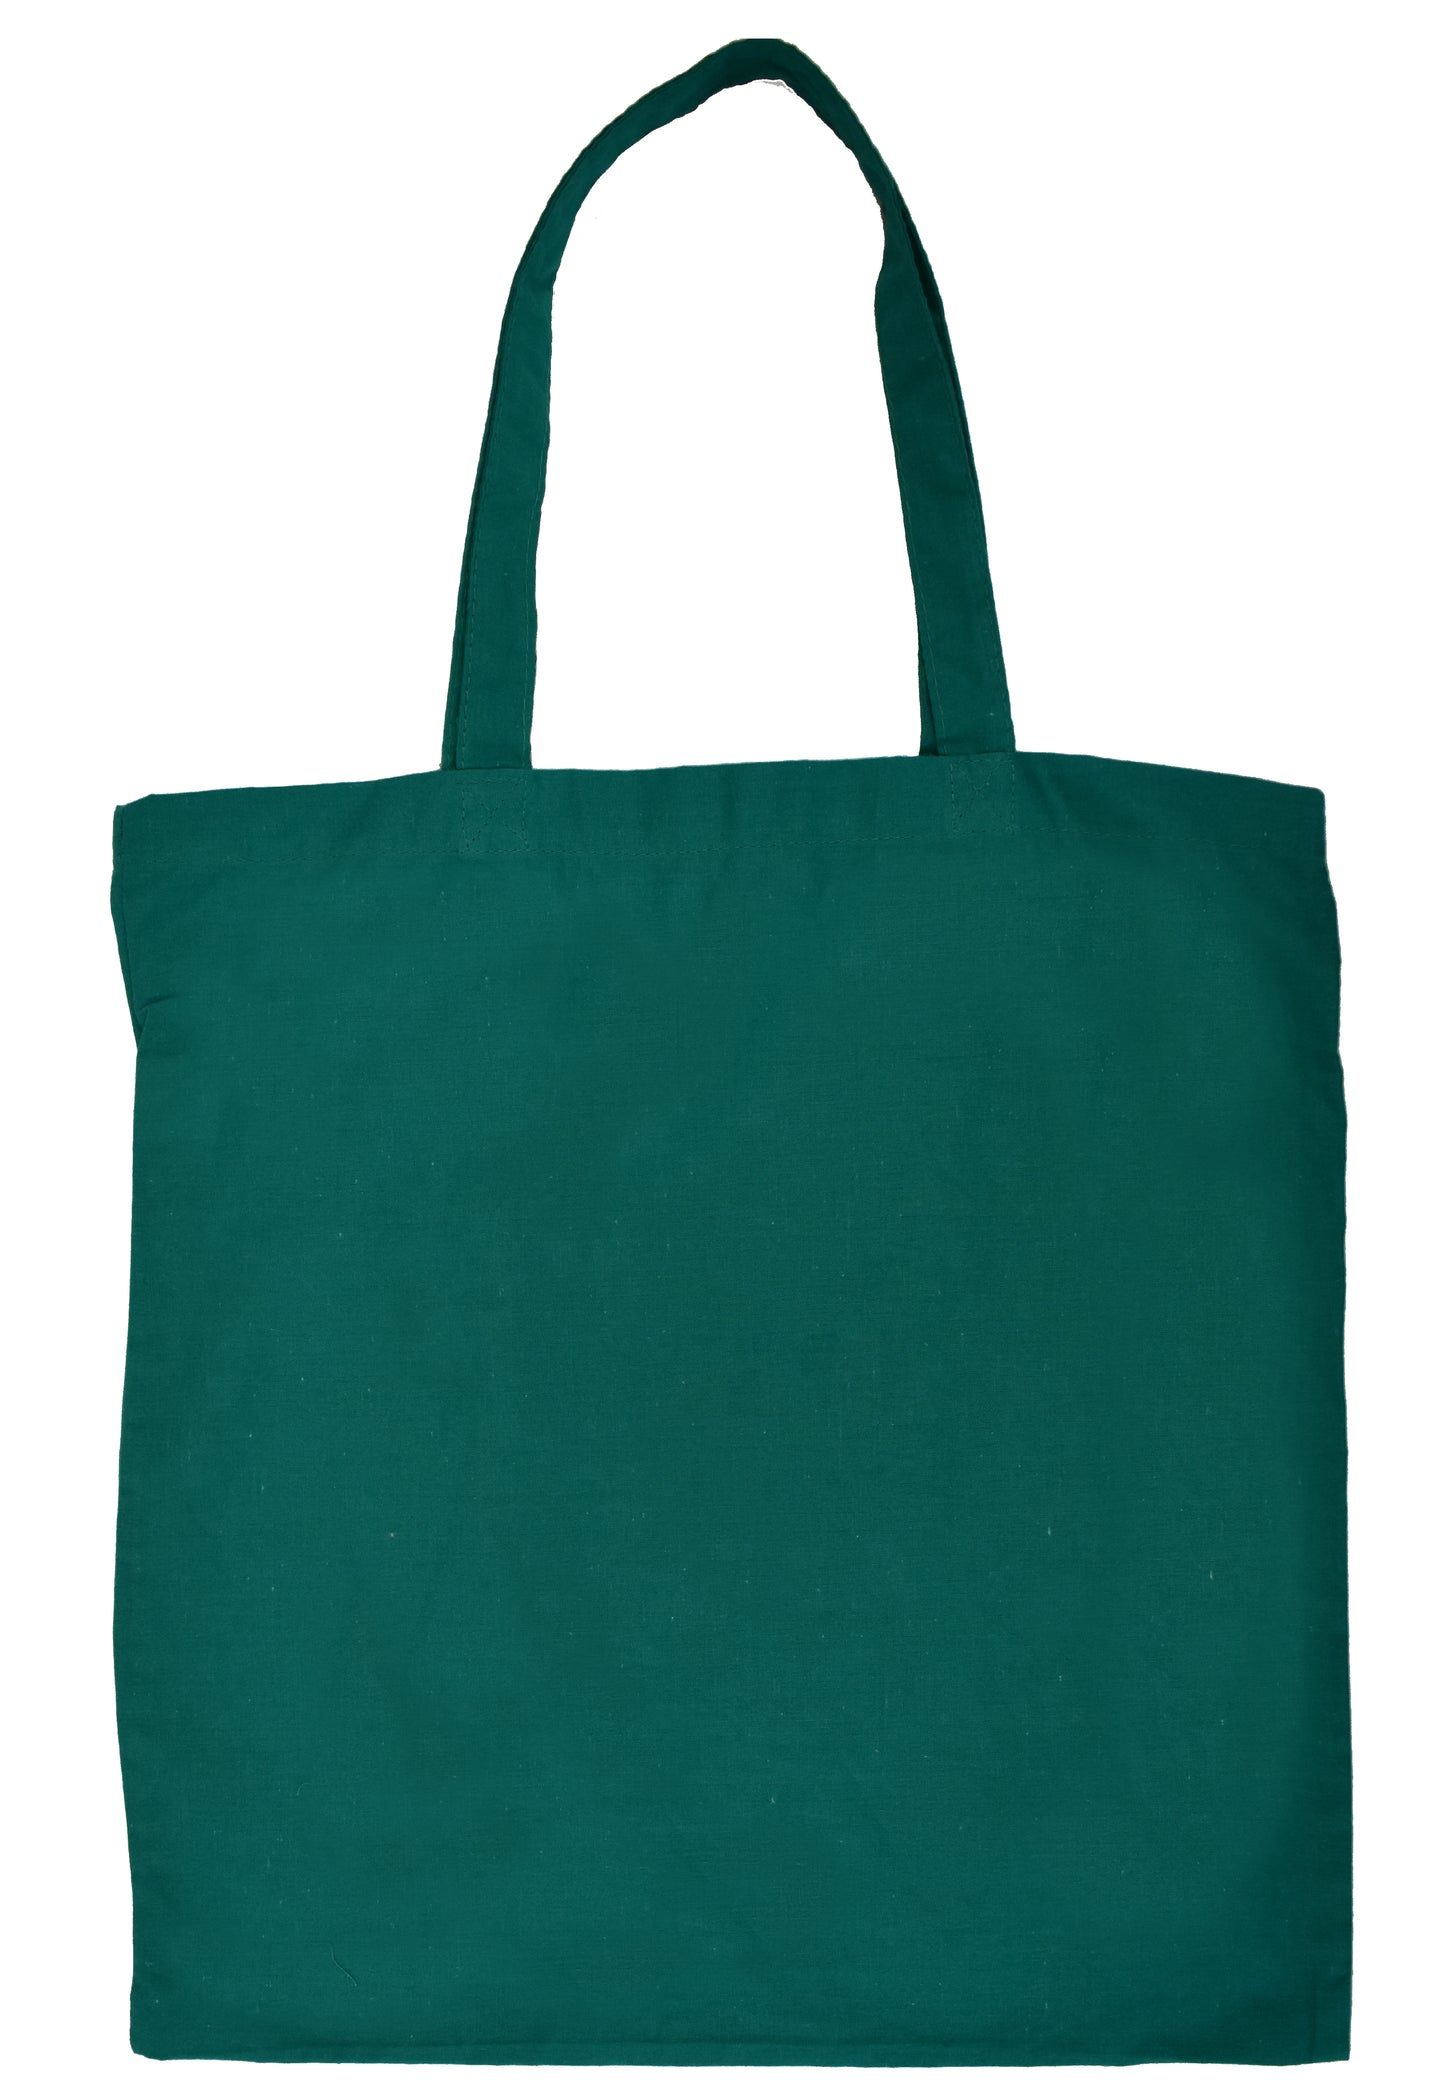 Stylish Tote Bag | Cotton Tote Bag | Justtotebags.online